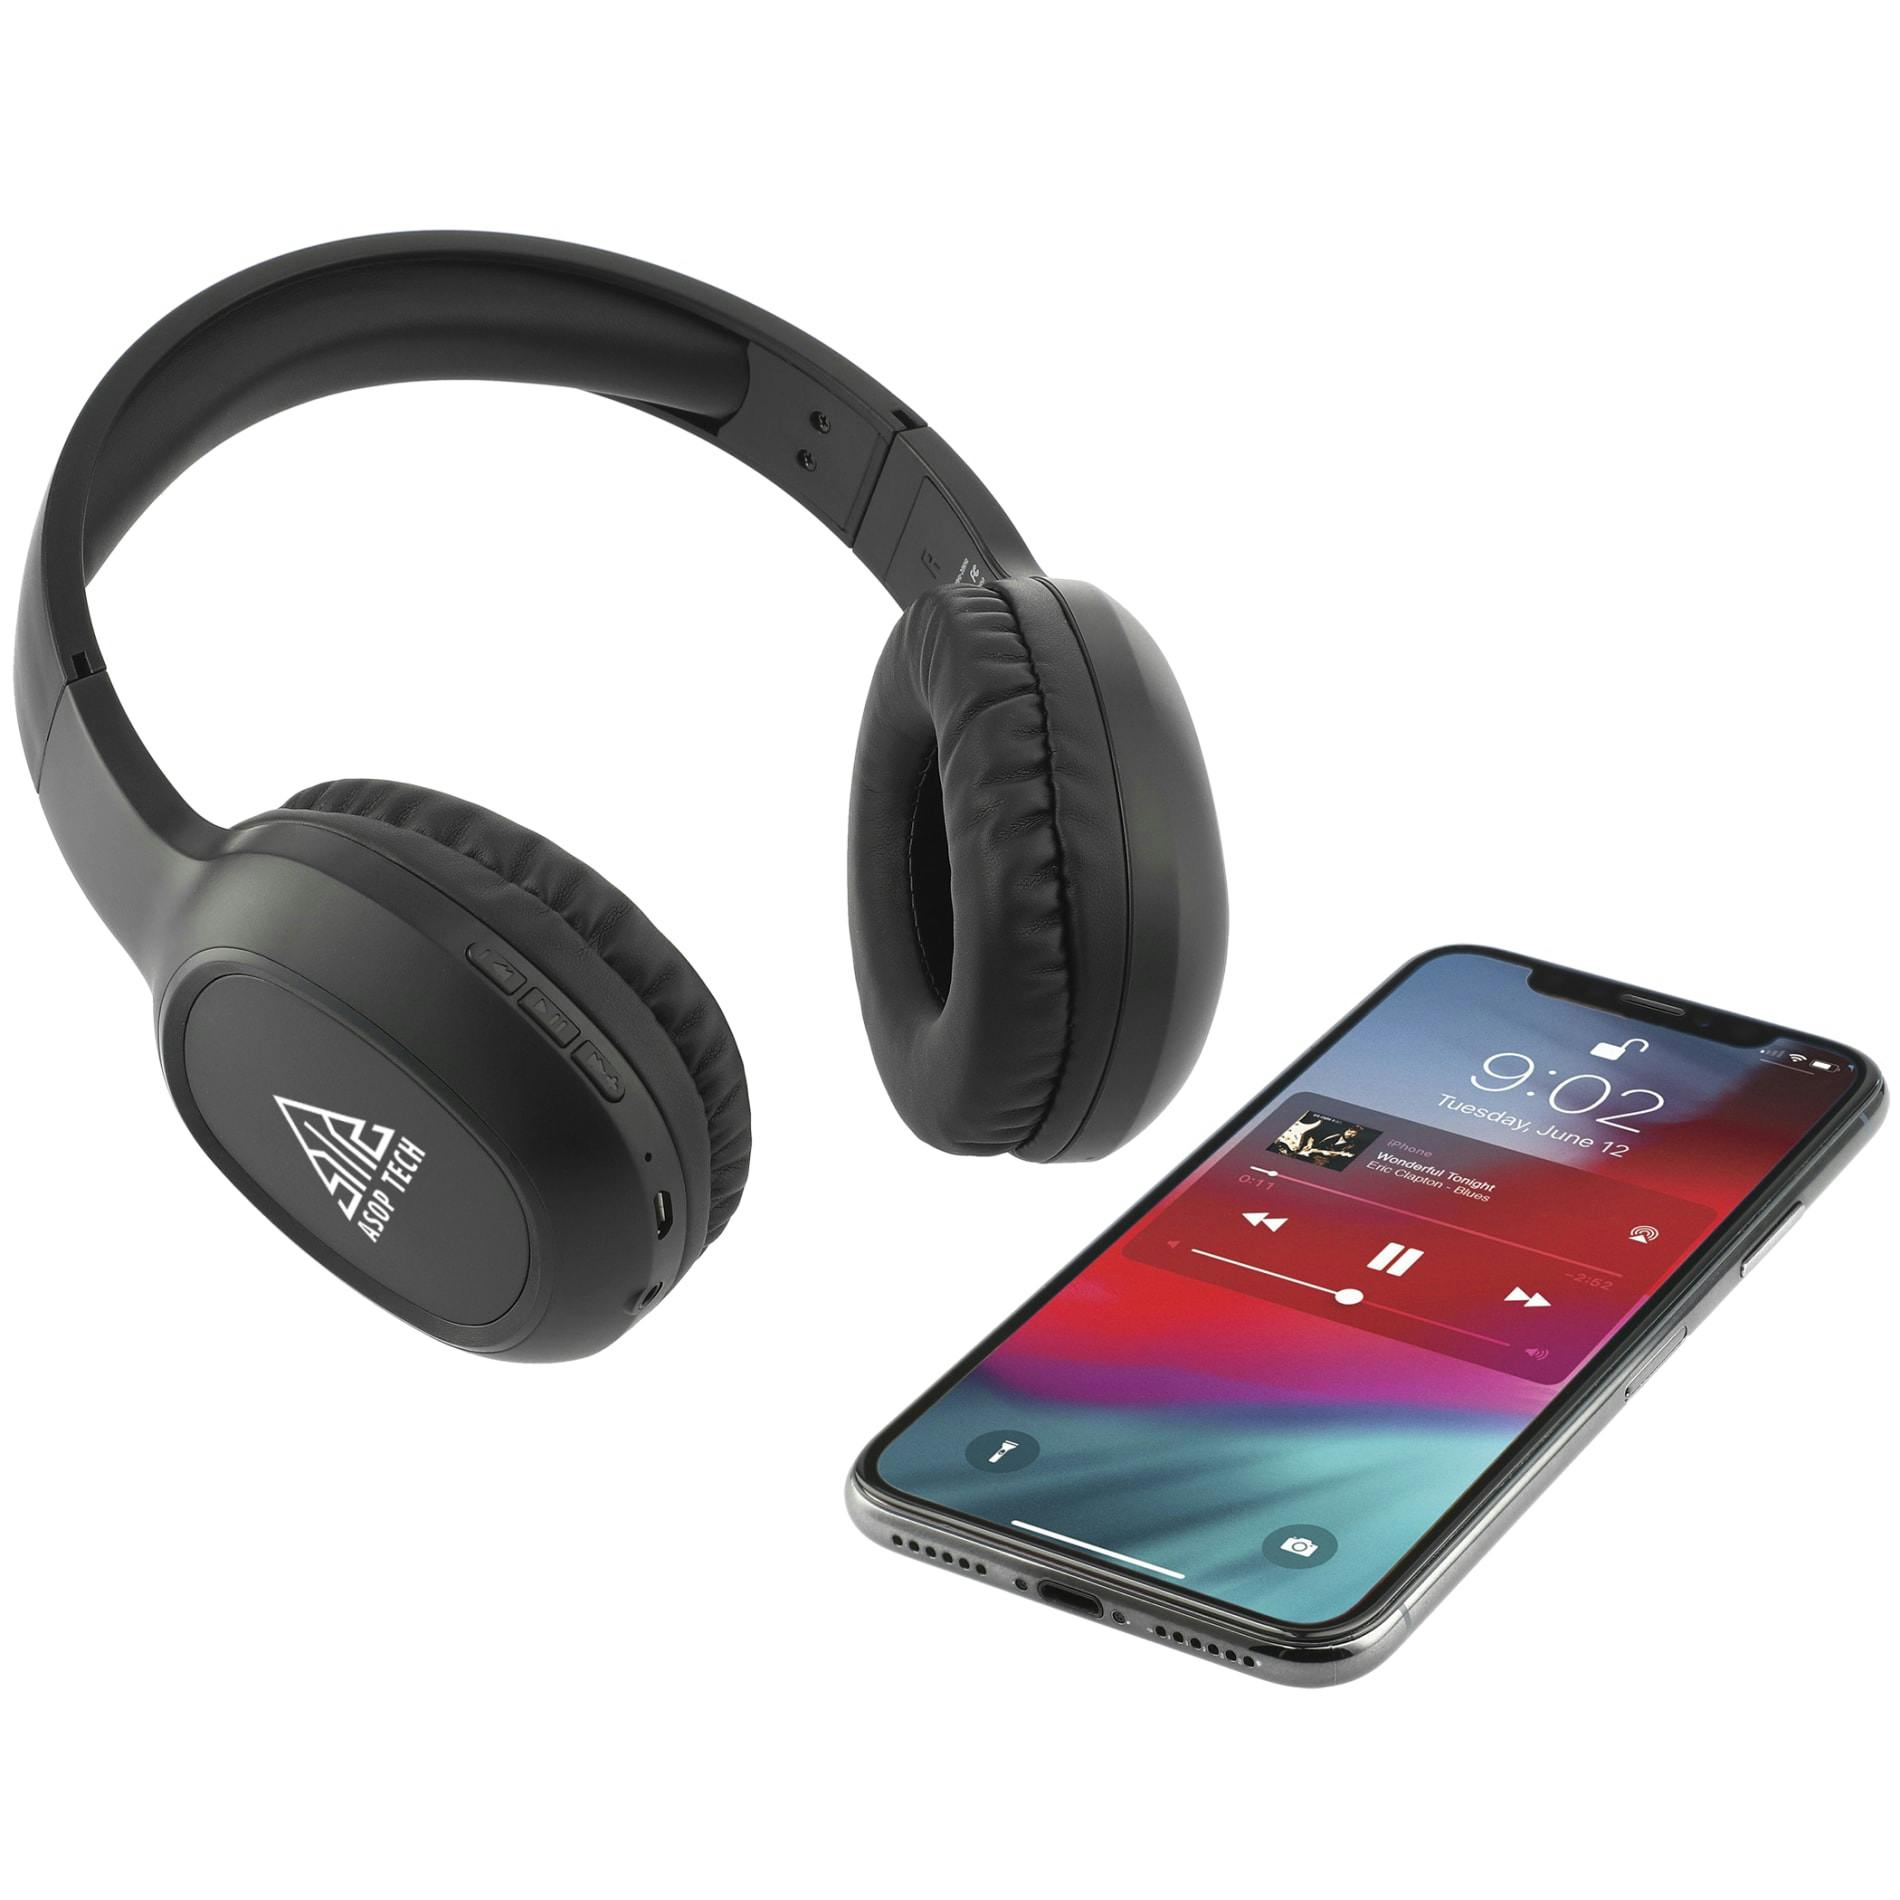 Oppo Bluetooth Headphones and Microphone - additional Image 4